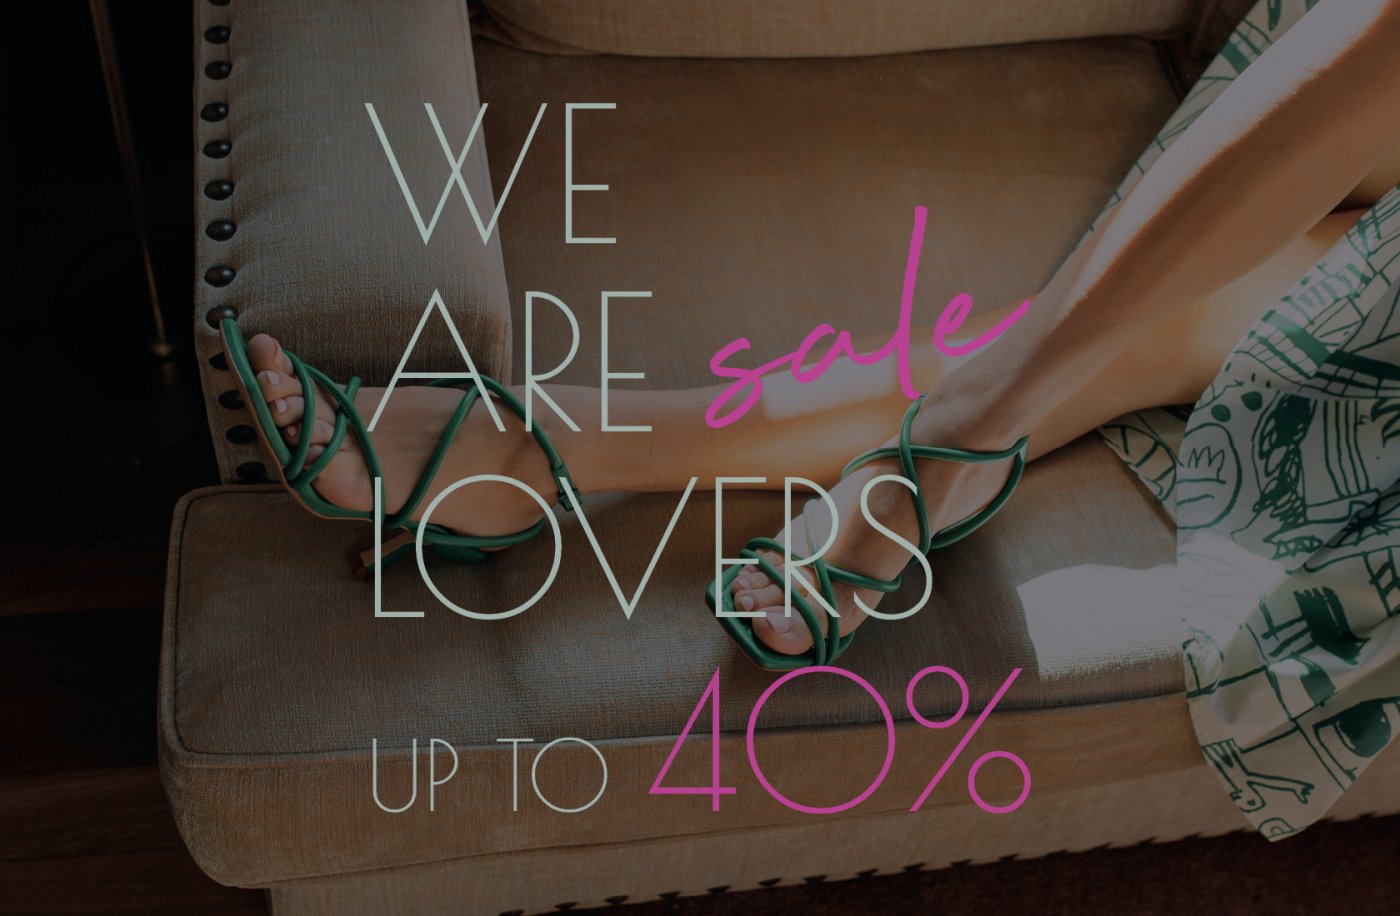 SALE - up to 40% off!